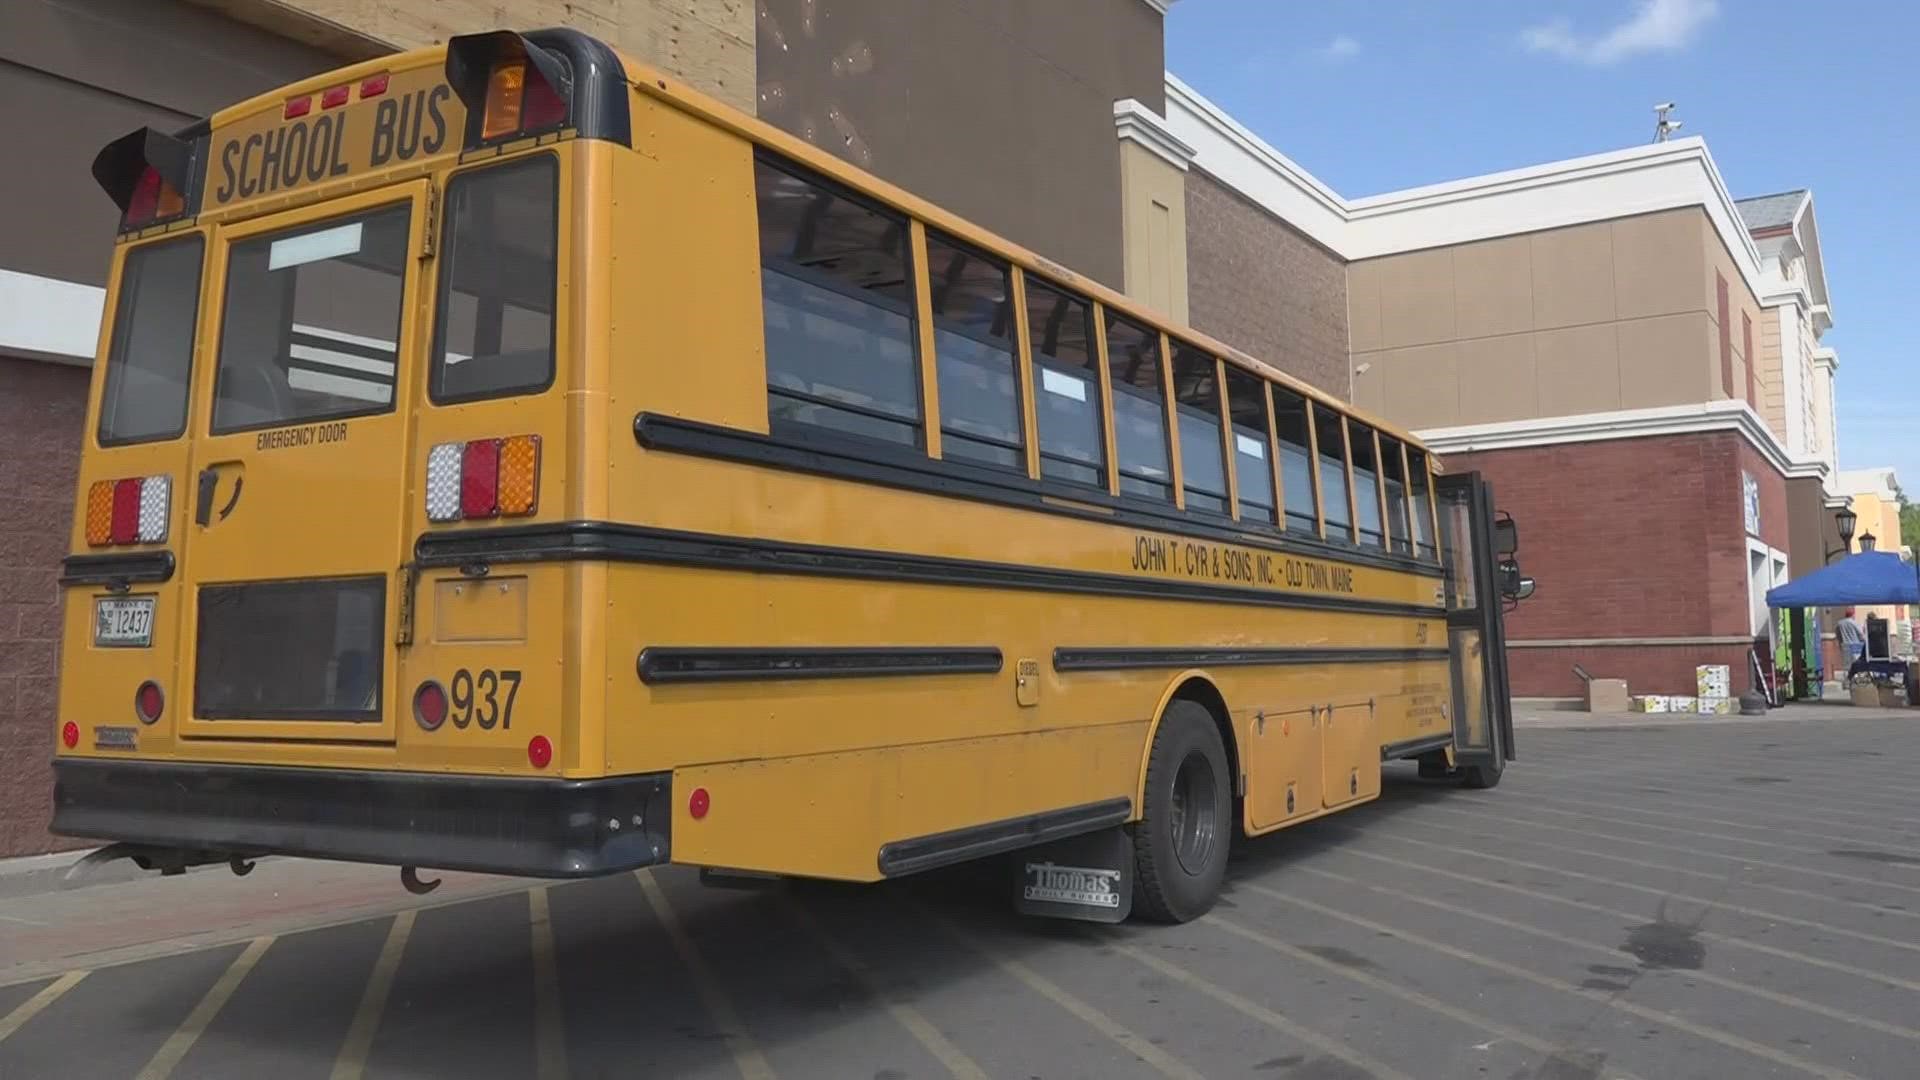 United Way of Eastern Maine partnered with Penquis Friday for a "Fill the Bus" donation drive, accepting school supplies for Maine kids who need them.